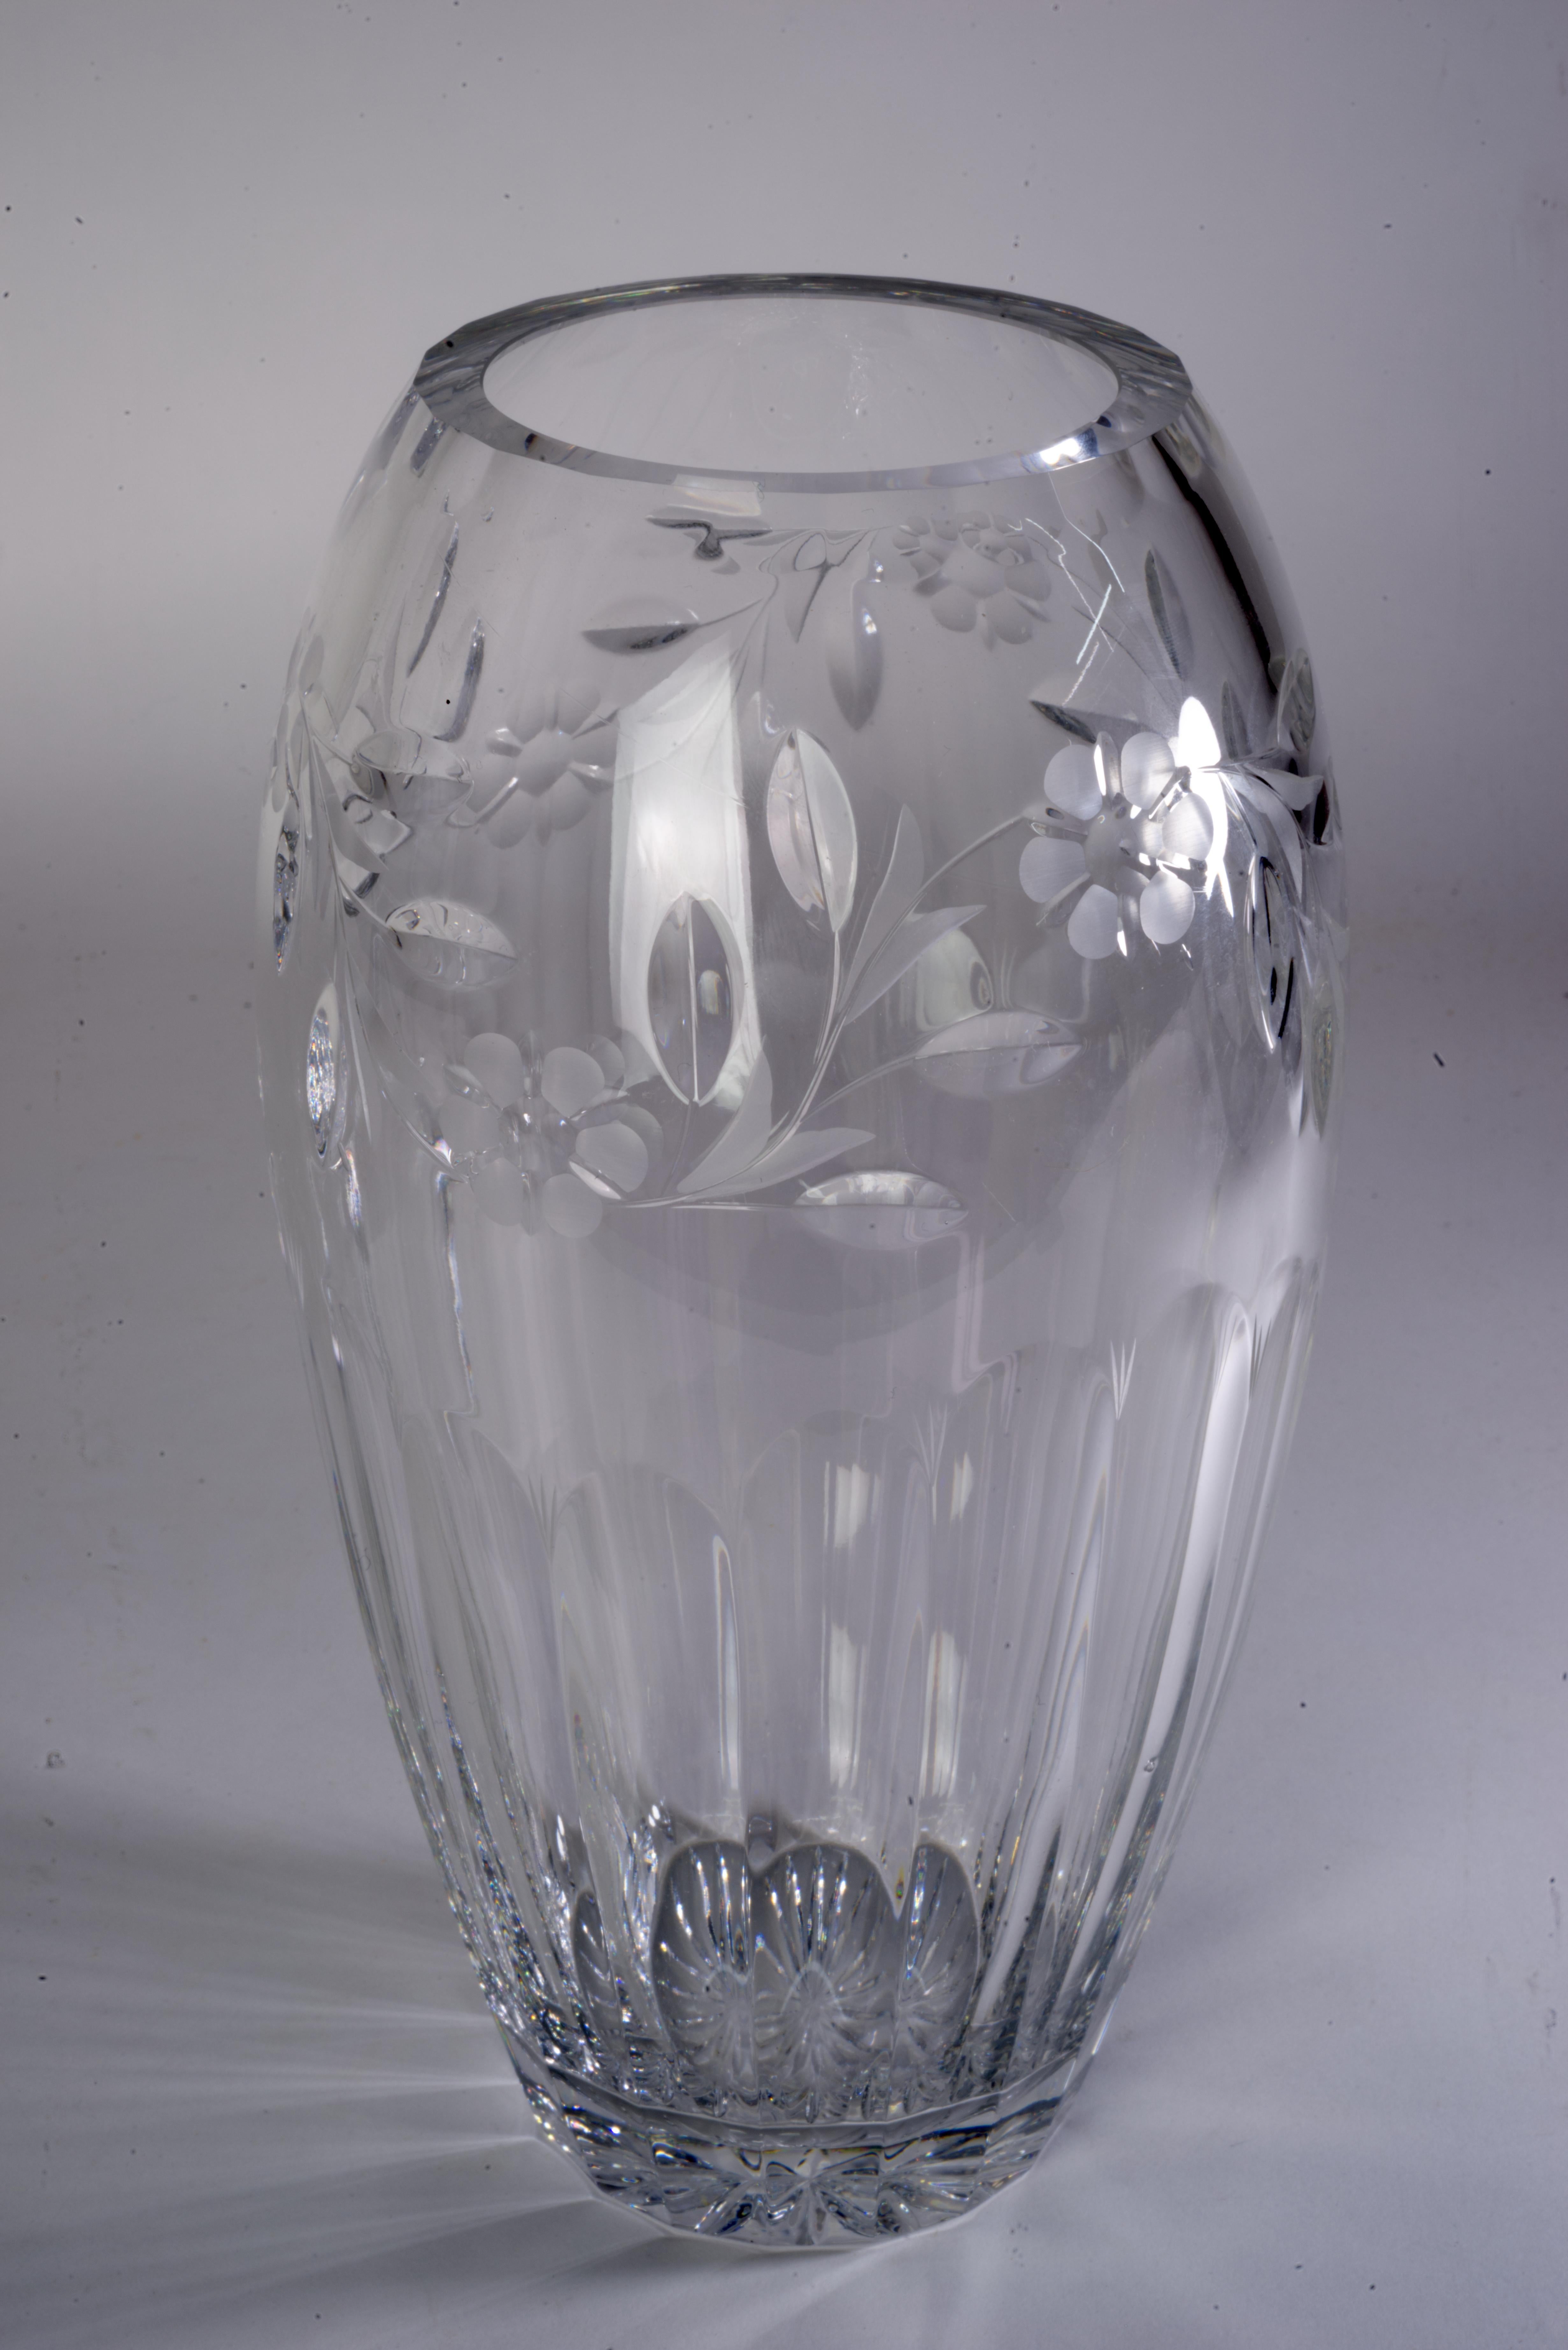  Vintage large cut crystal vase was made by Rogaska in Country Garden pattern. The pattern can be characterized as combination of cut florals and panel designs, and it was in production from 1990 to 2009. The vase stands 10